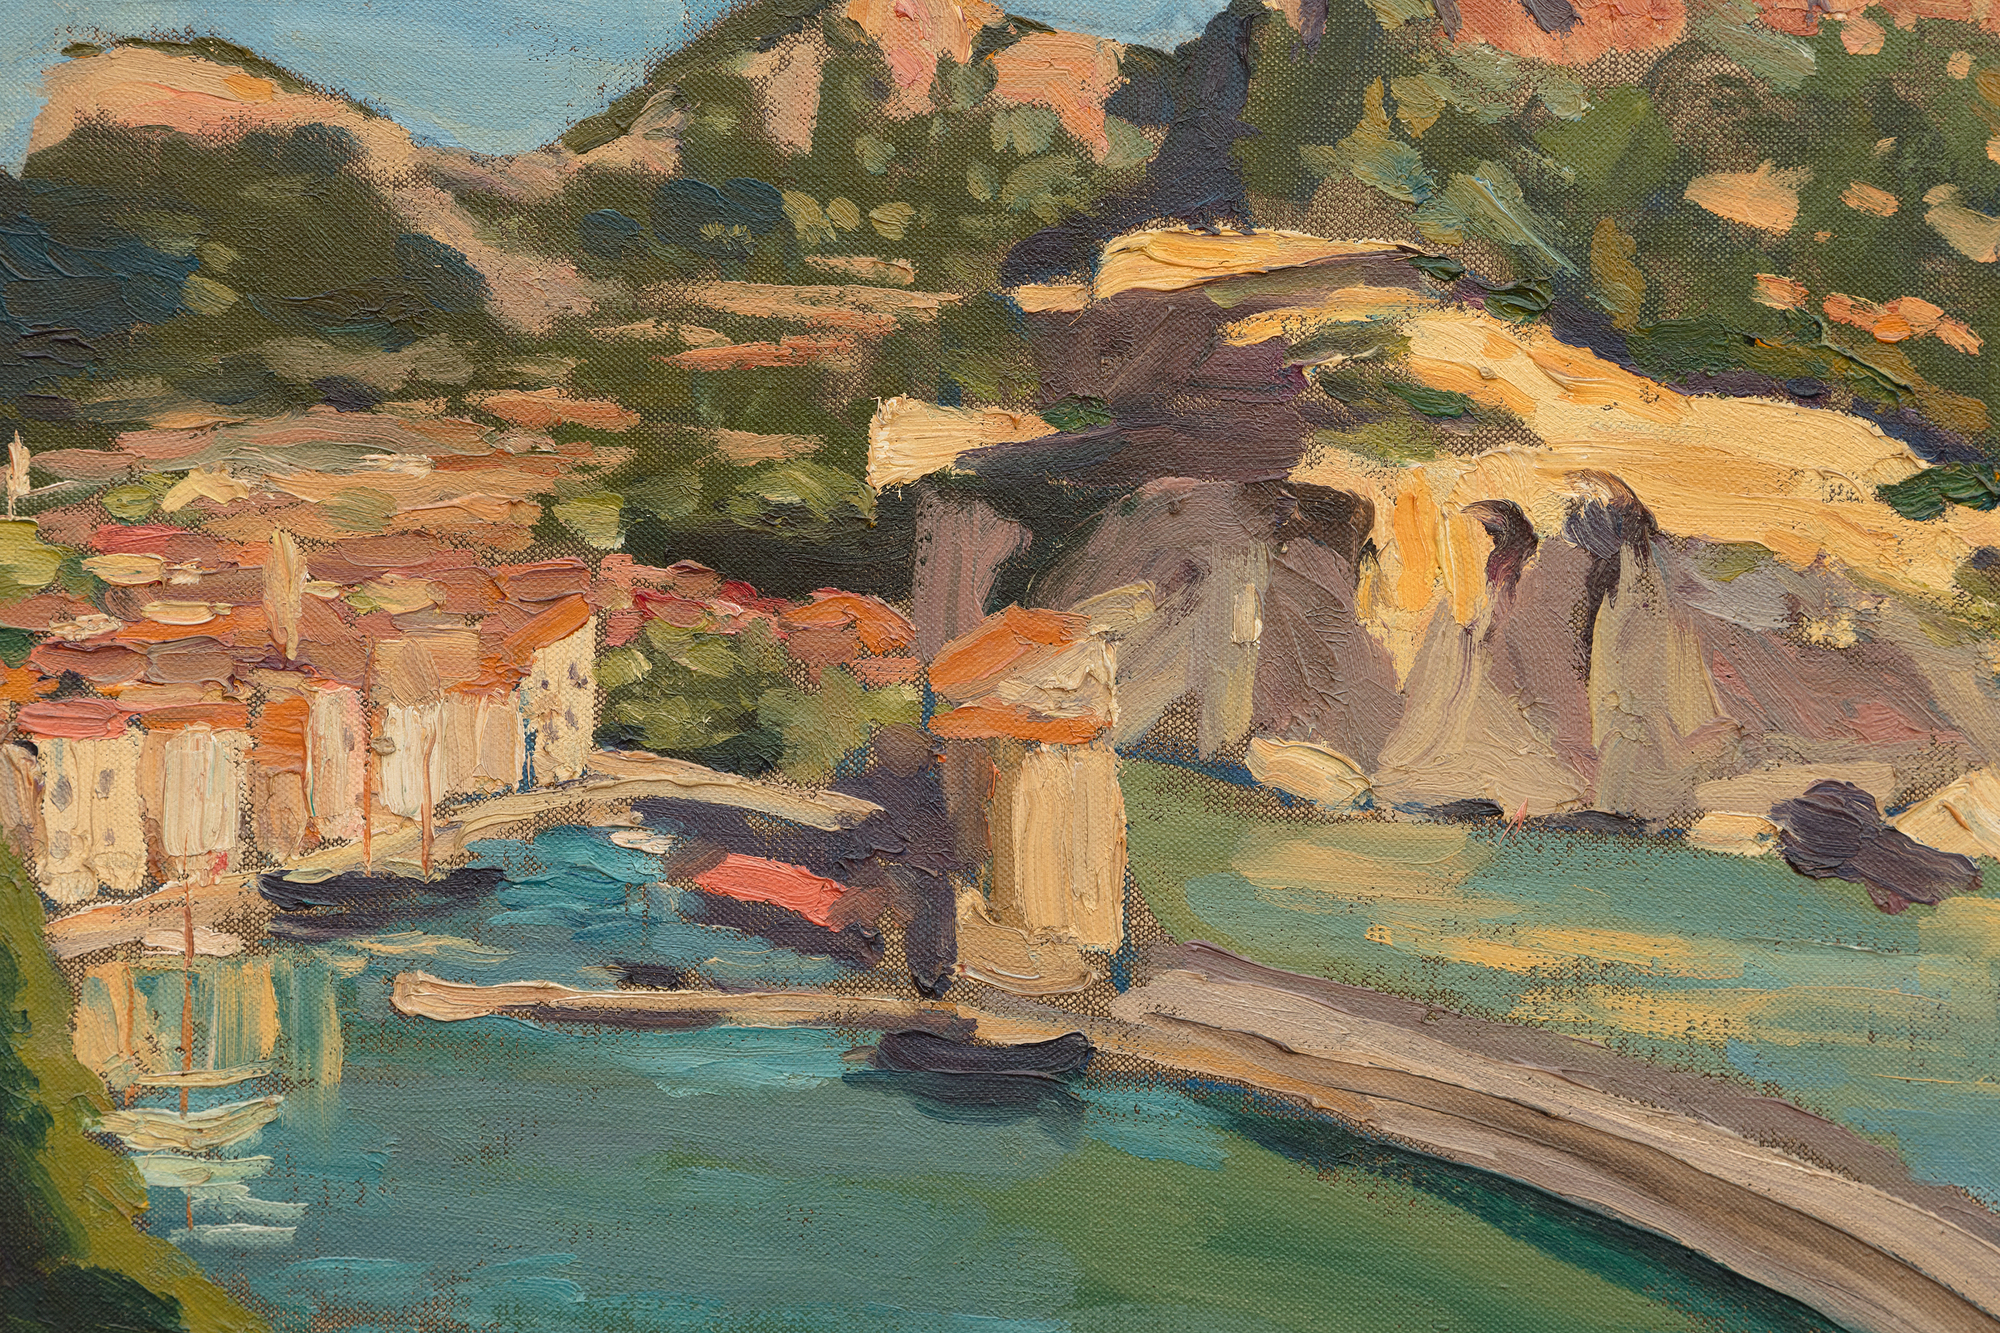 SIR WINSTON CHURCHILL - View Over Cassis Port (C 333) - oil on canvas - 25 x 30 in.